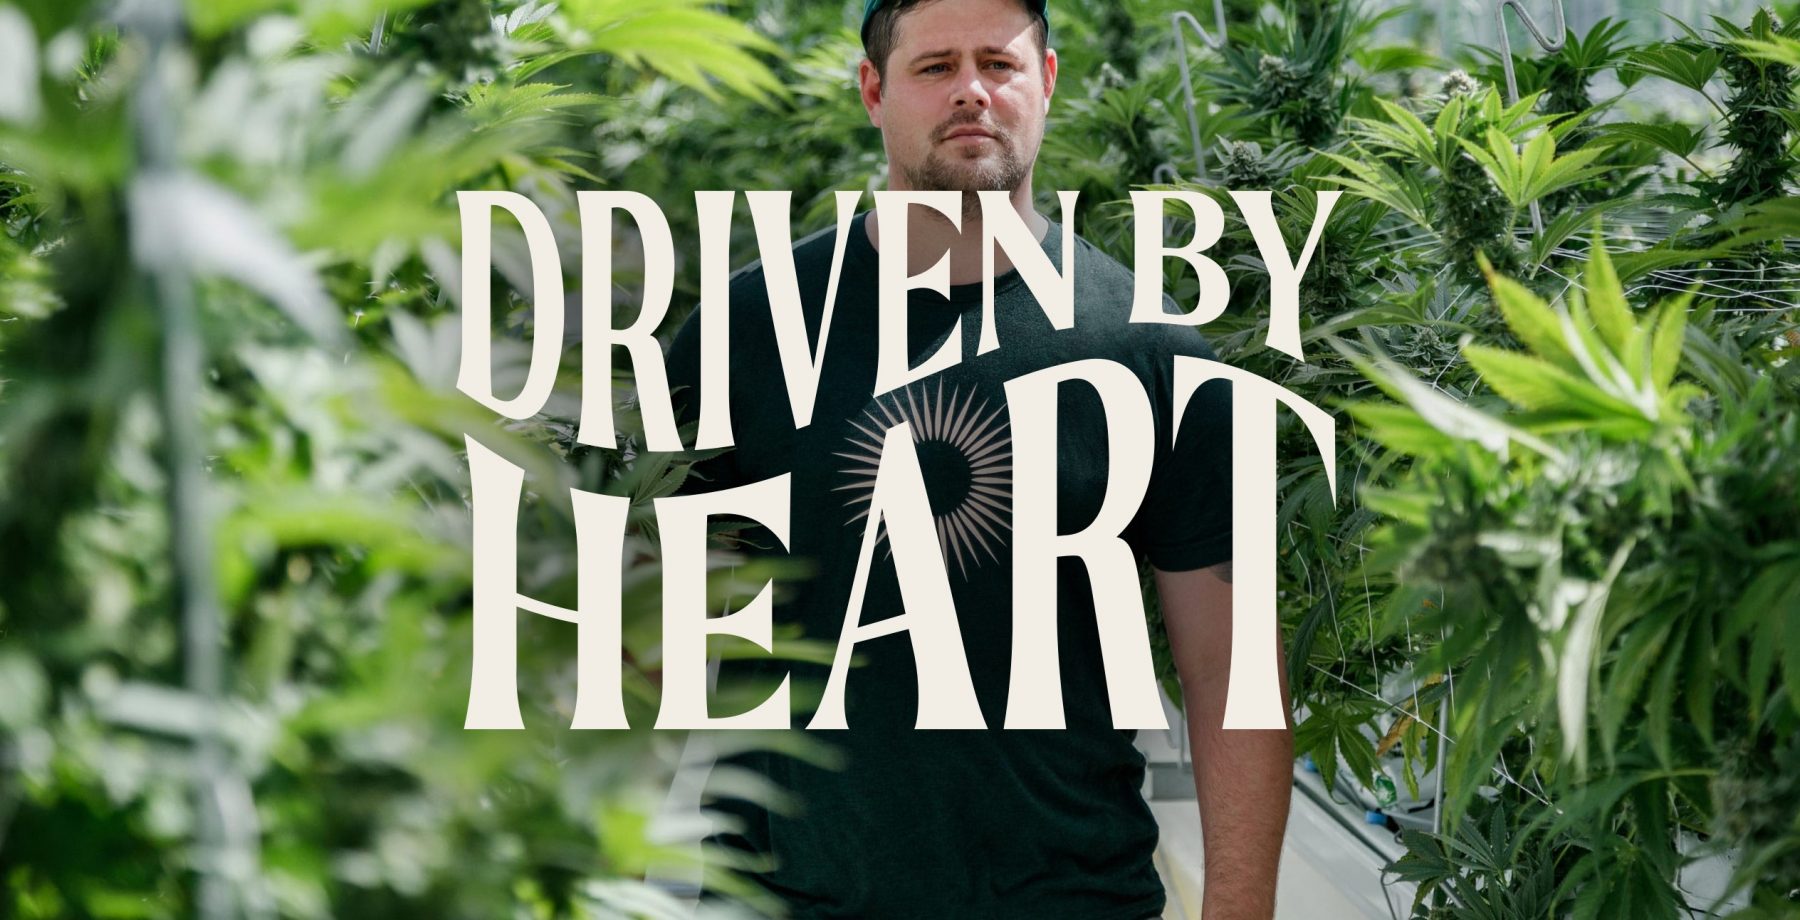 driven by heart text over model in greenhouse